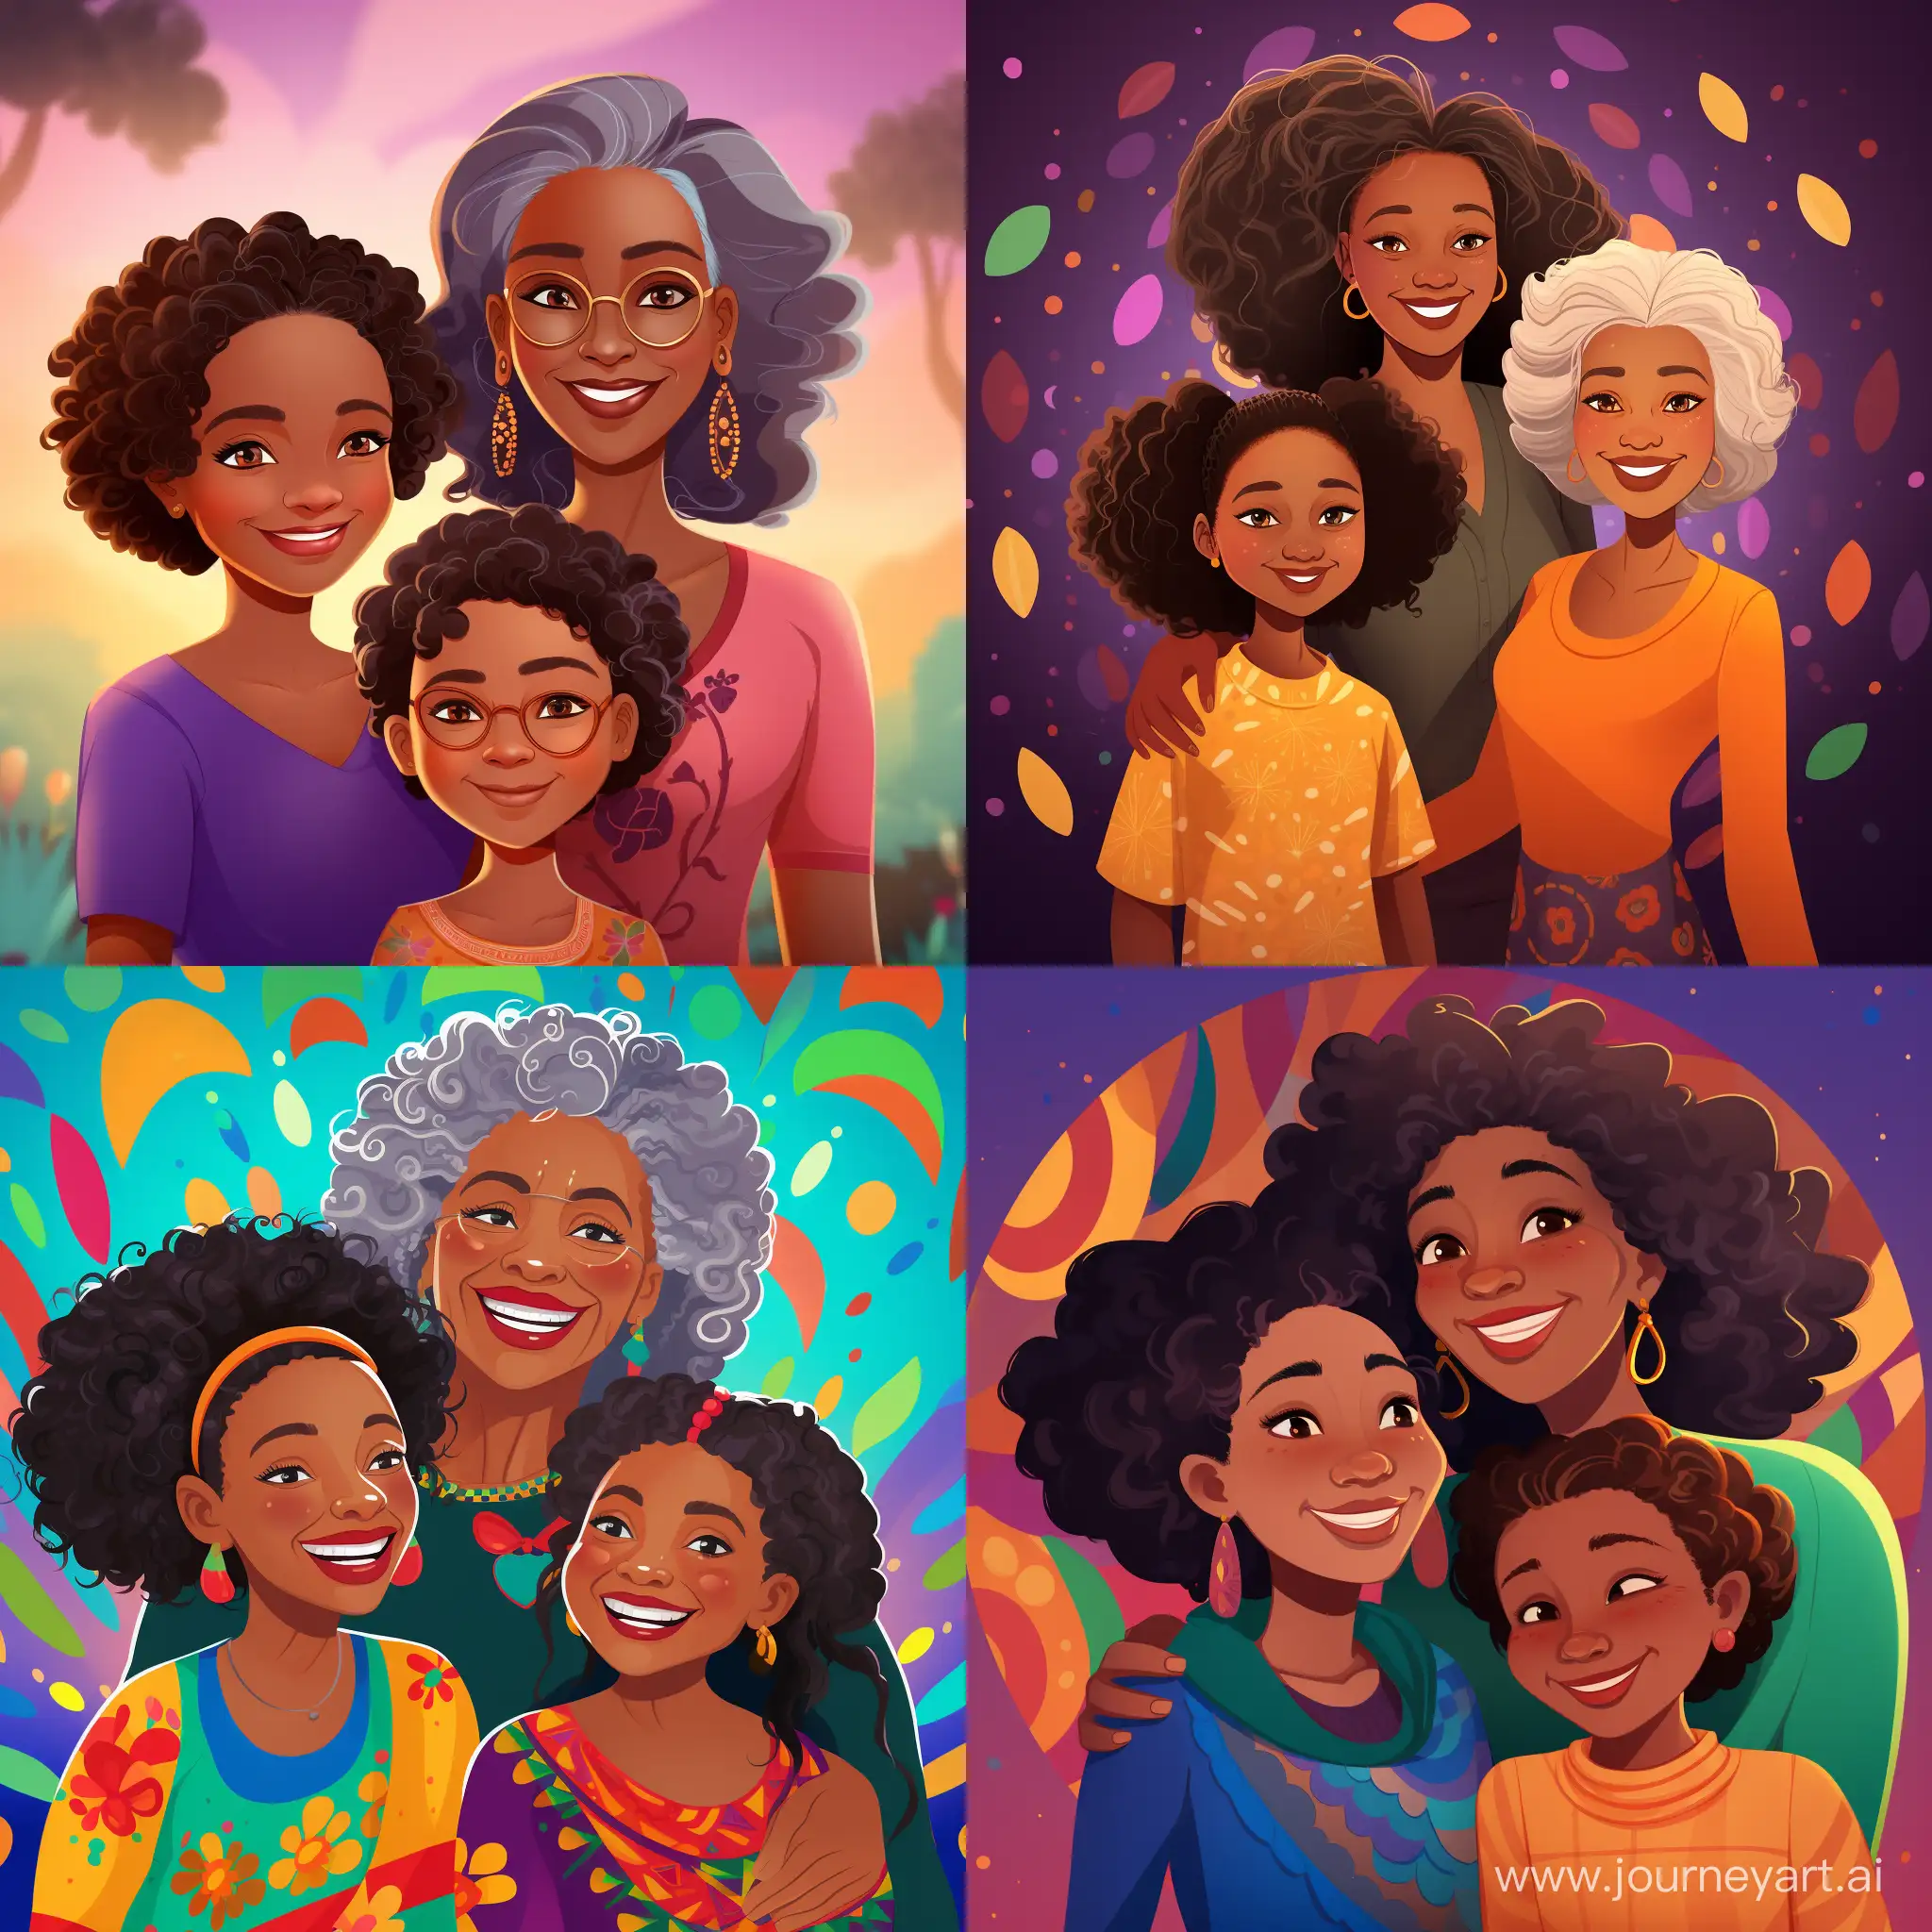 Colourful cartoon style of a black girl with her mother and grandmother